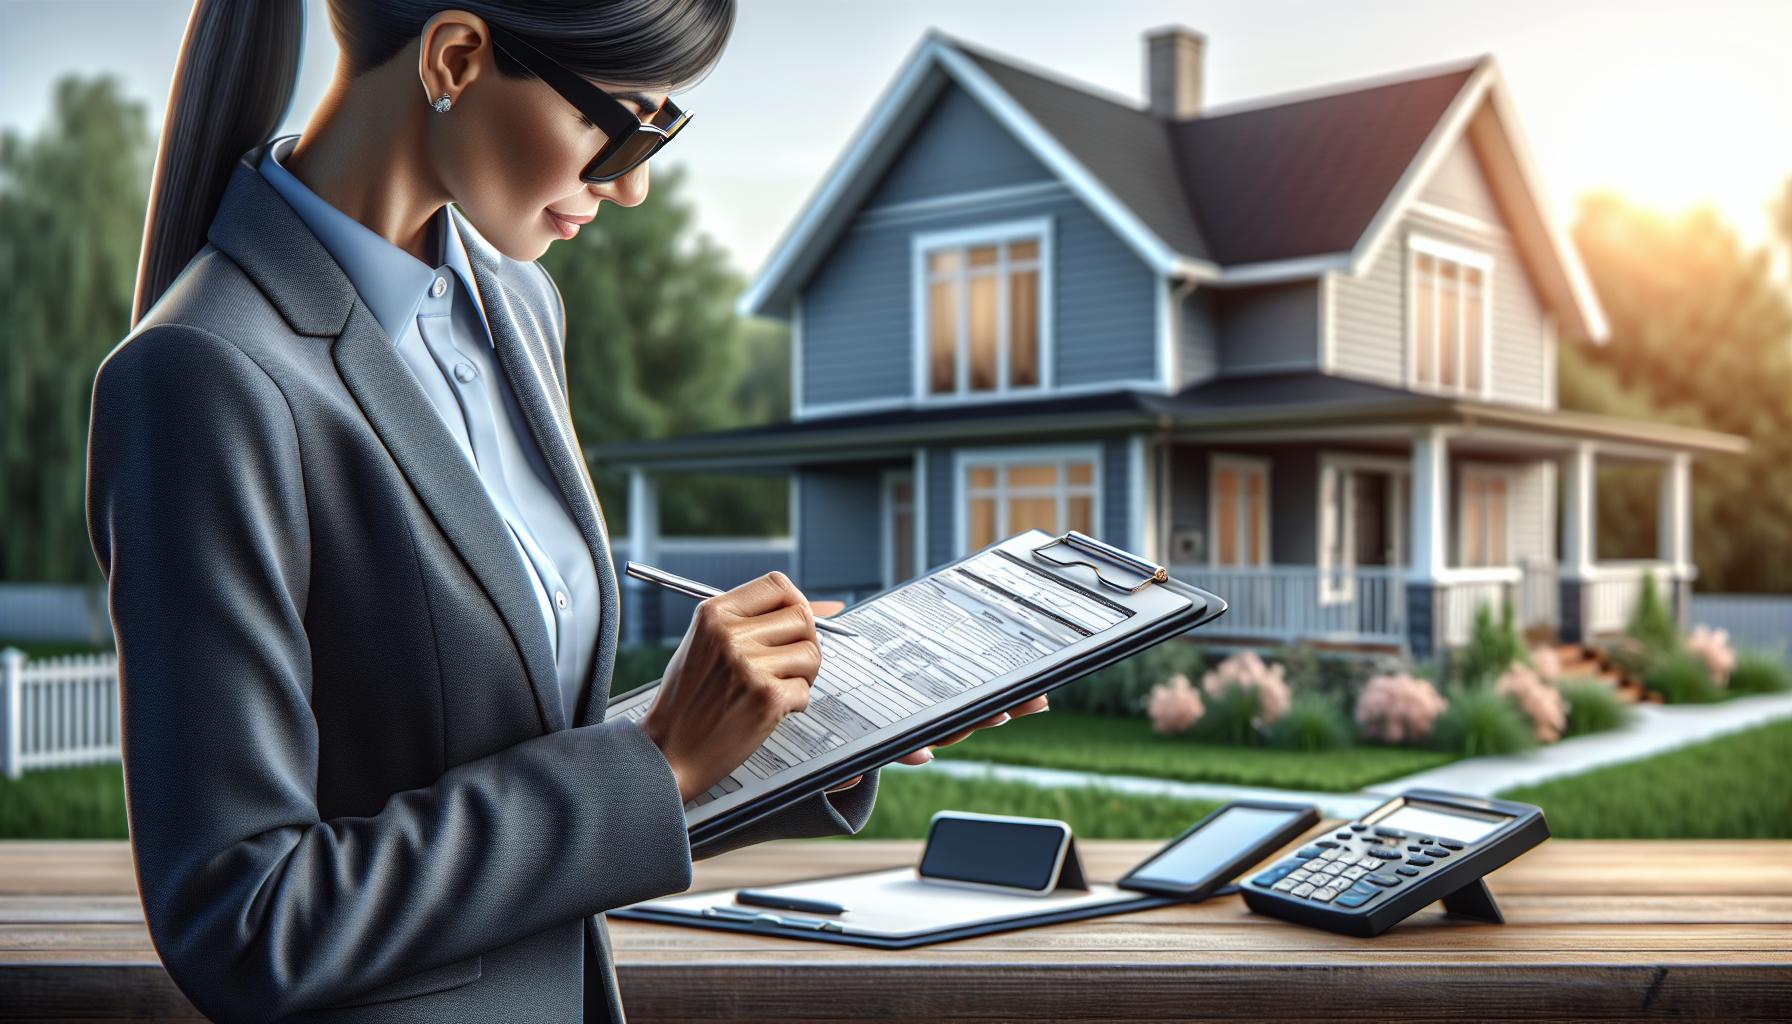 Master Real Estate: How to Value Investment Property Accurately